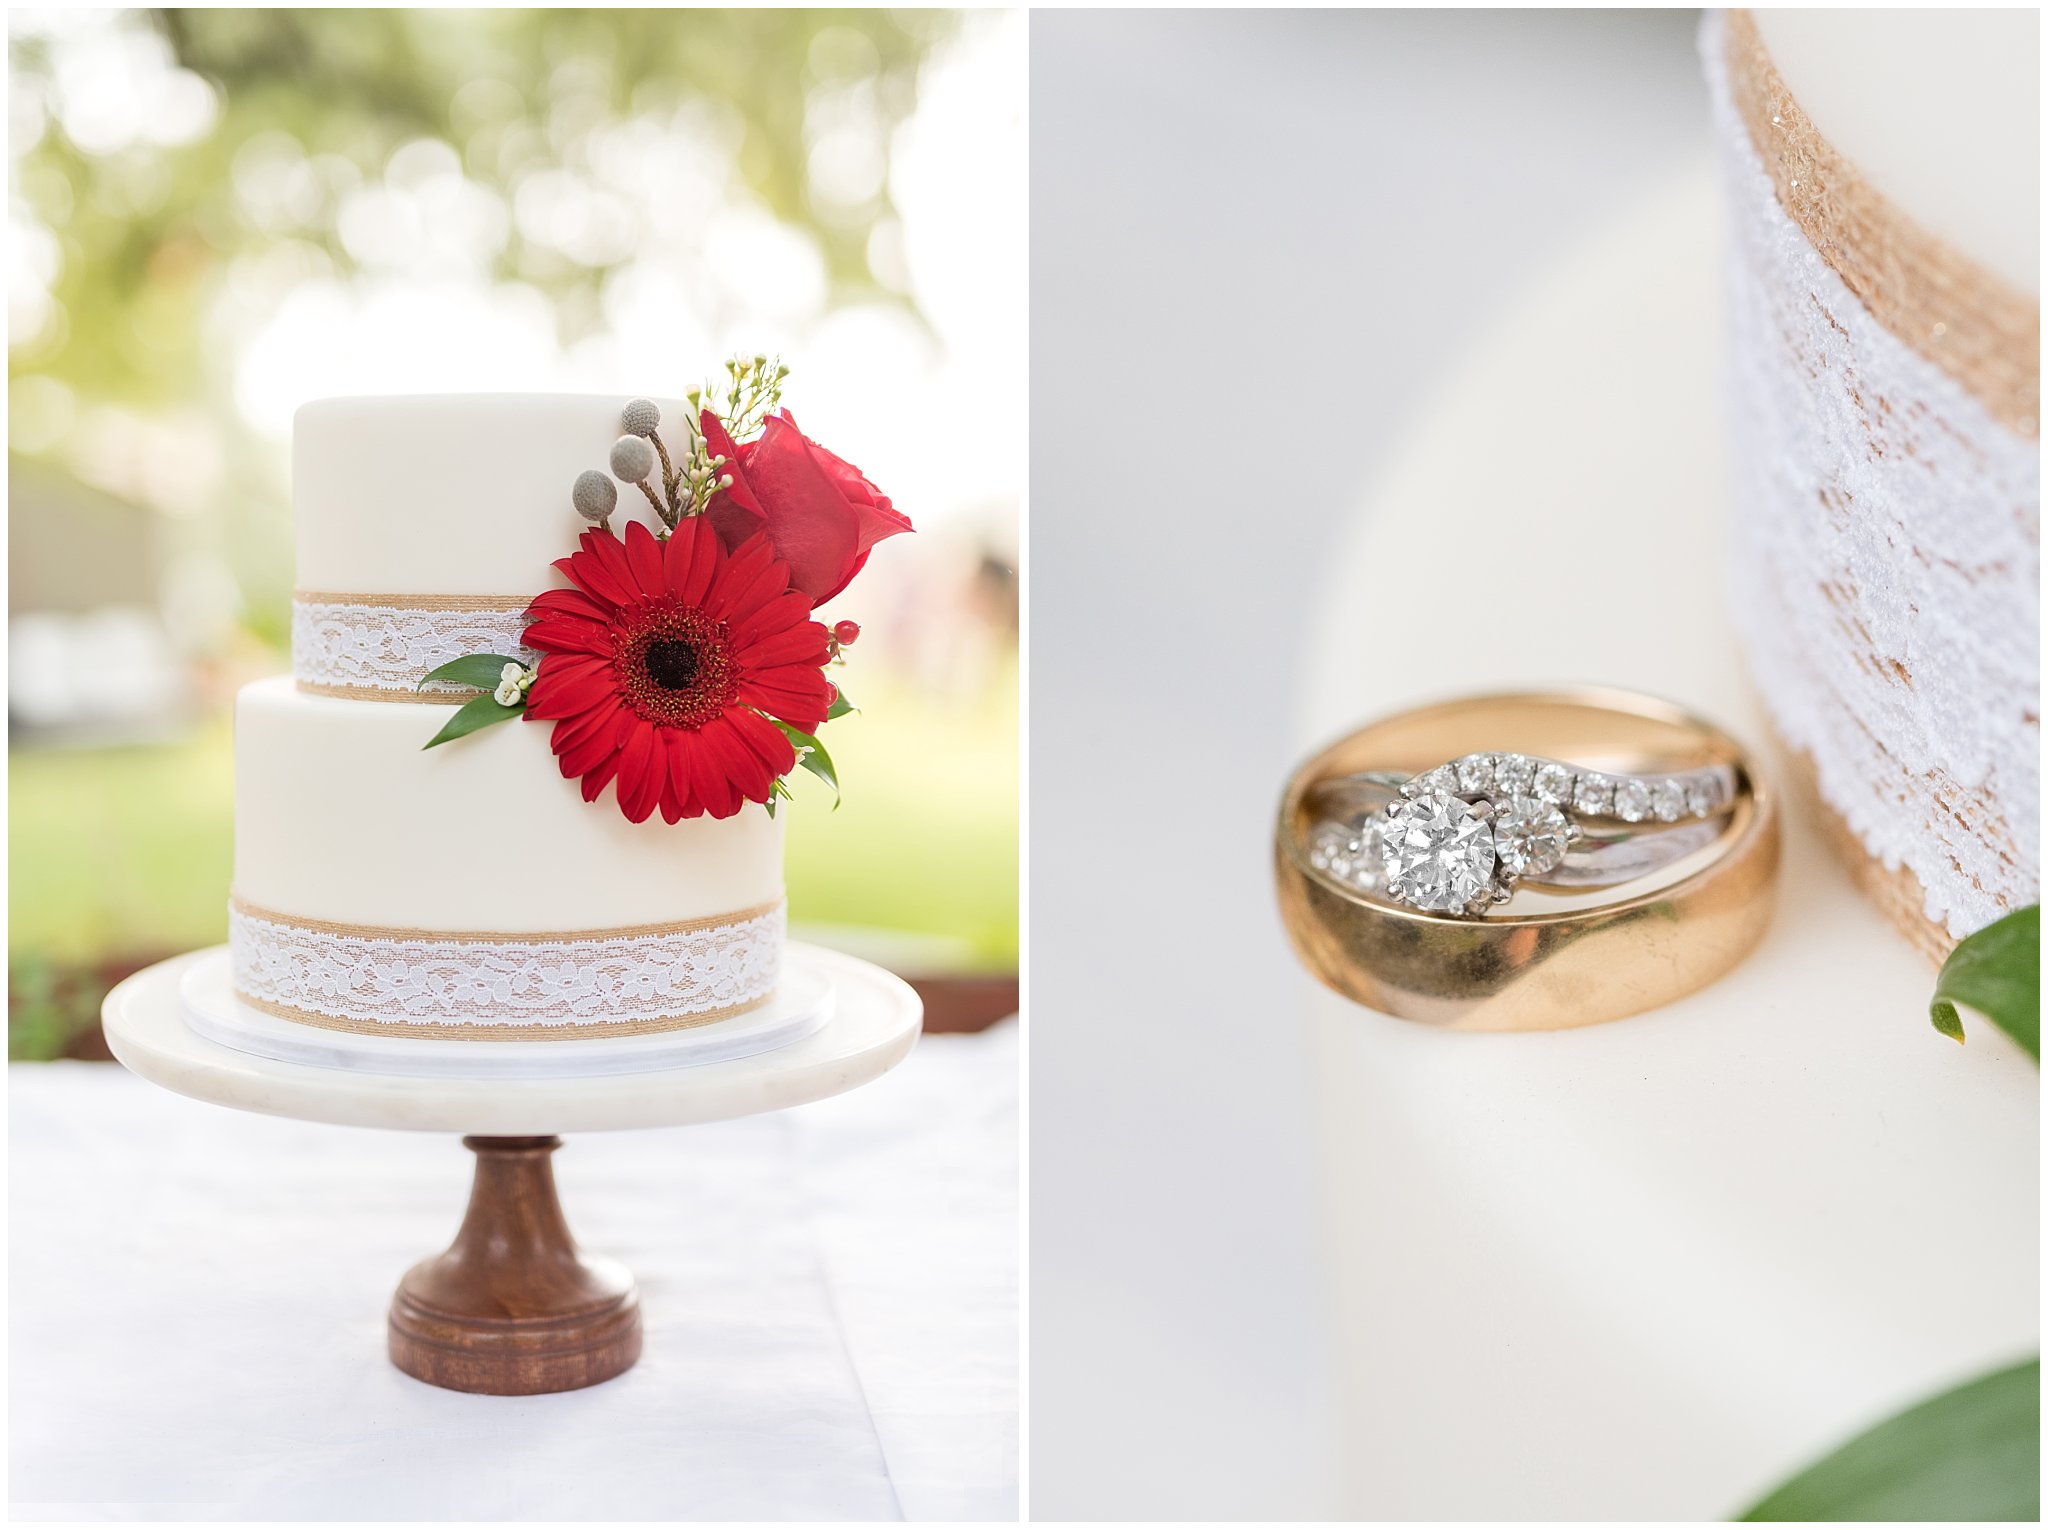 Sweet Cravings and Dancing Daisies Floral | White and red cake with burlap and rings on the cake | Red and Grey wedding | Davis County Outdoor Wedding | Jessie and Dallin Photography